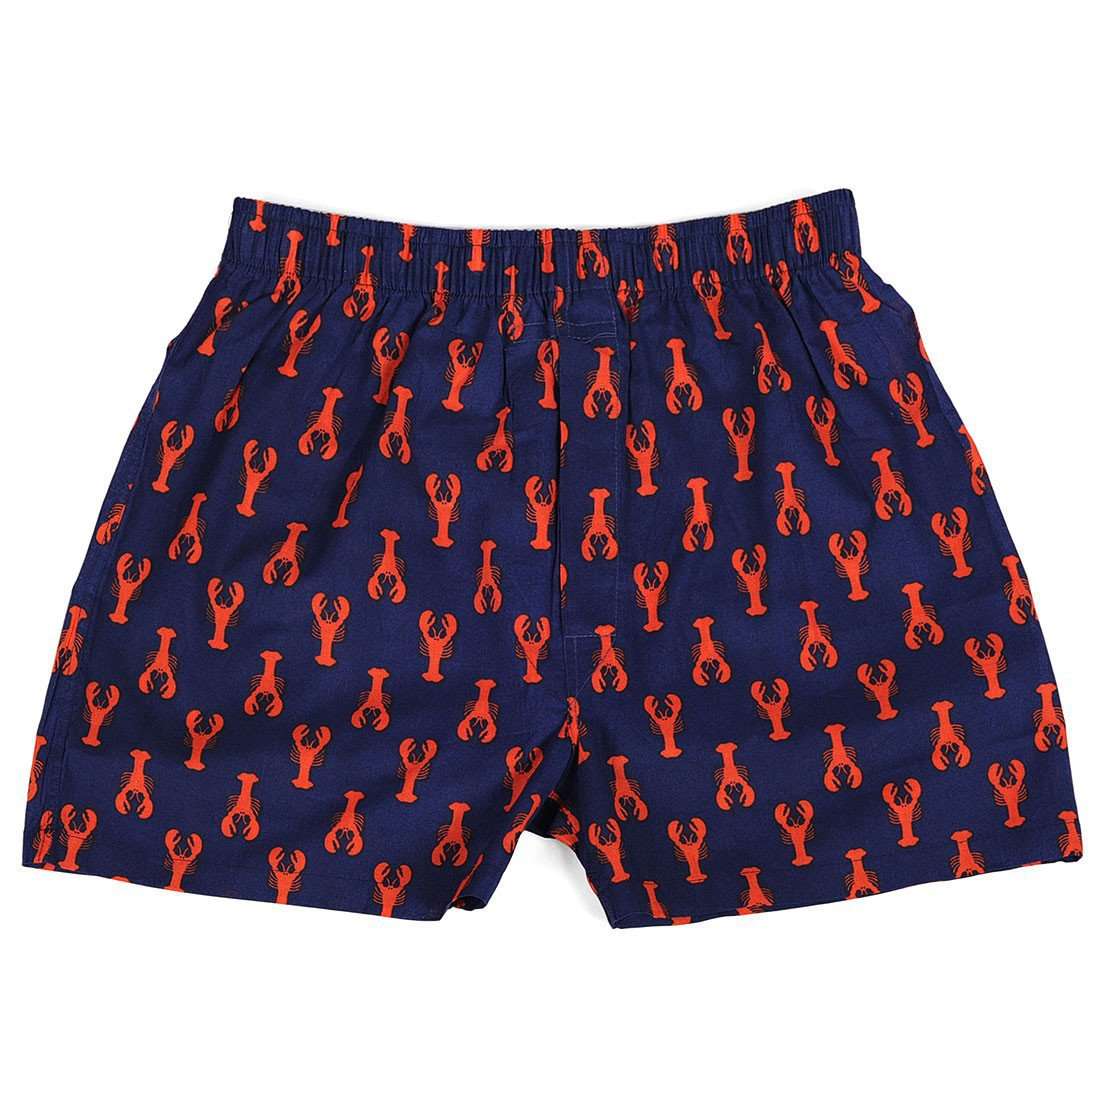 Men's Lobster Boxers in Navy by Malabar Bay - Country Club Prep